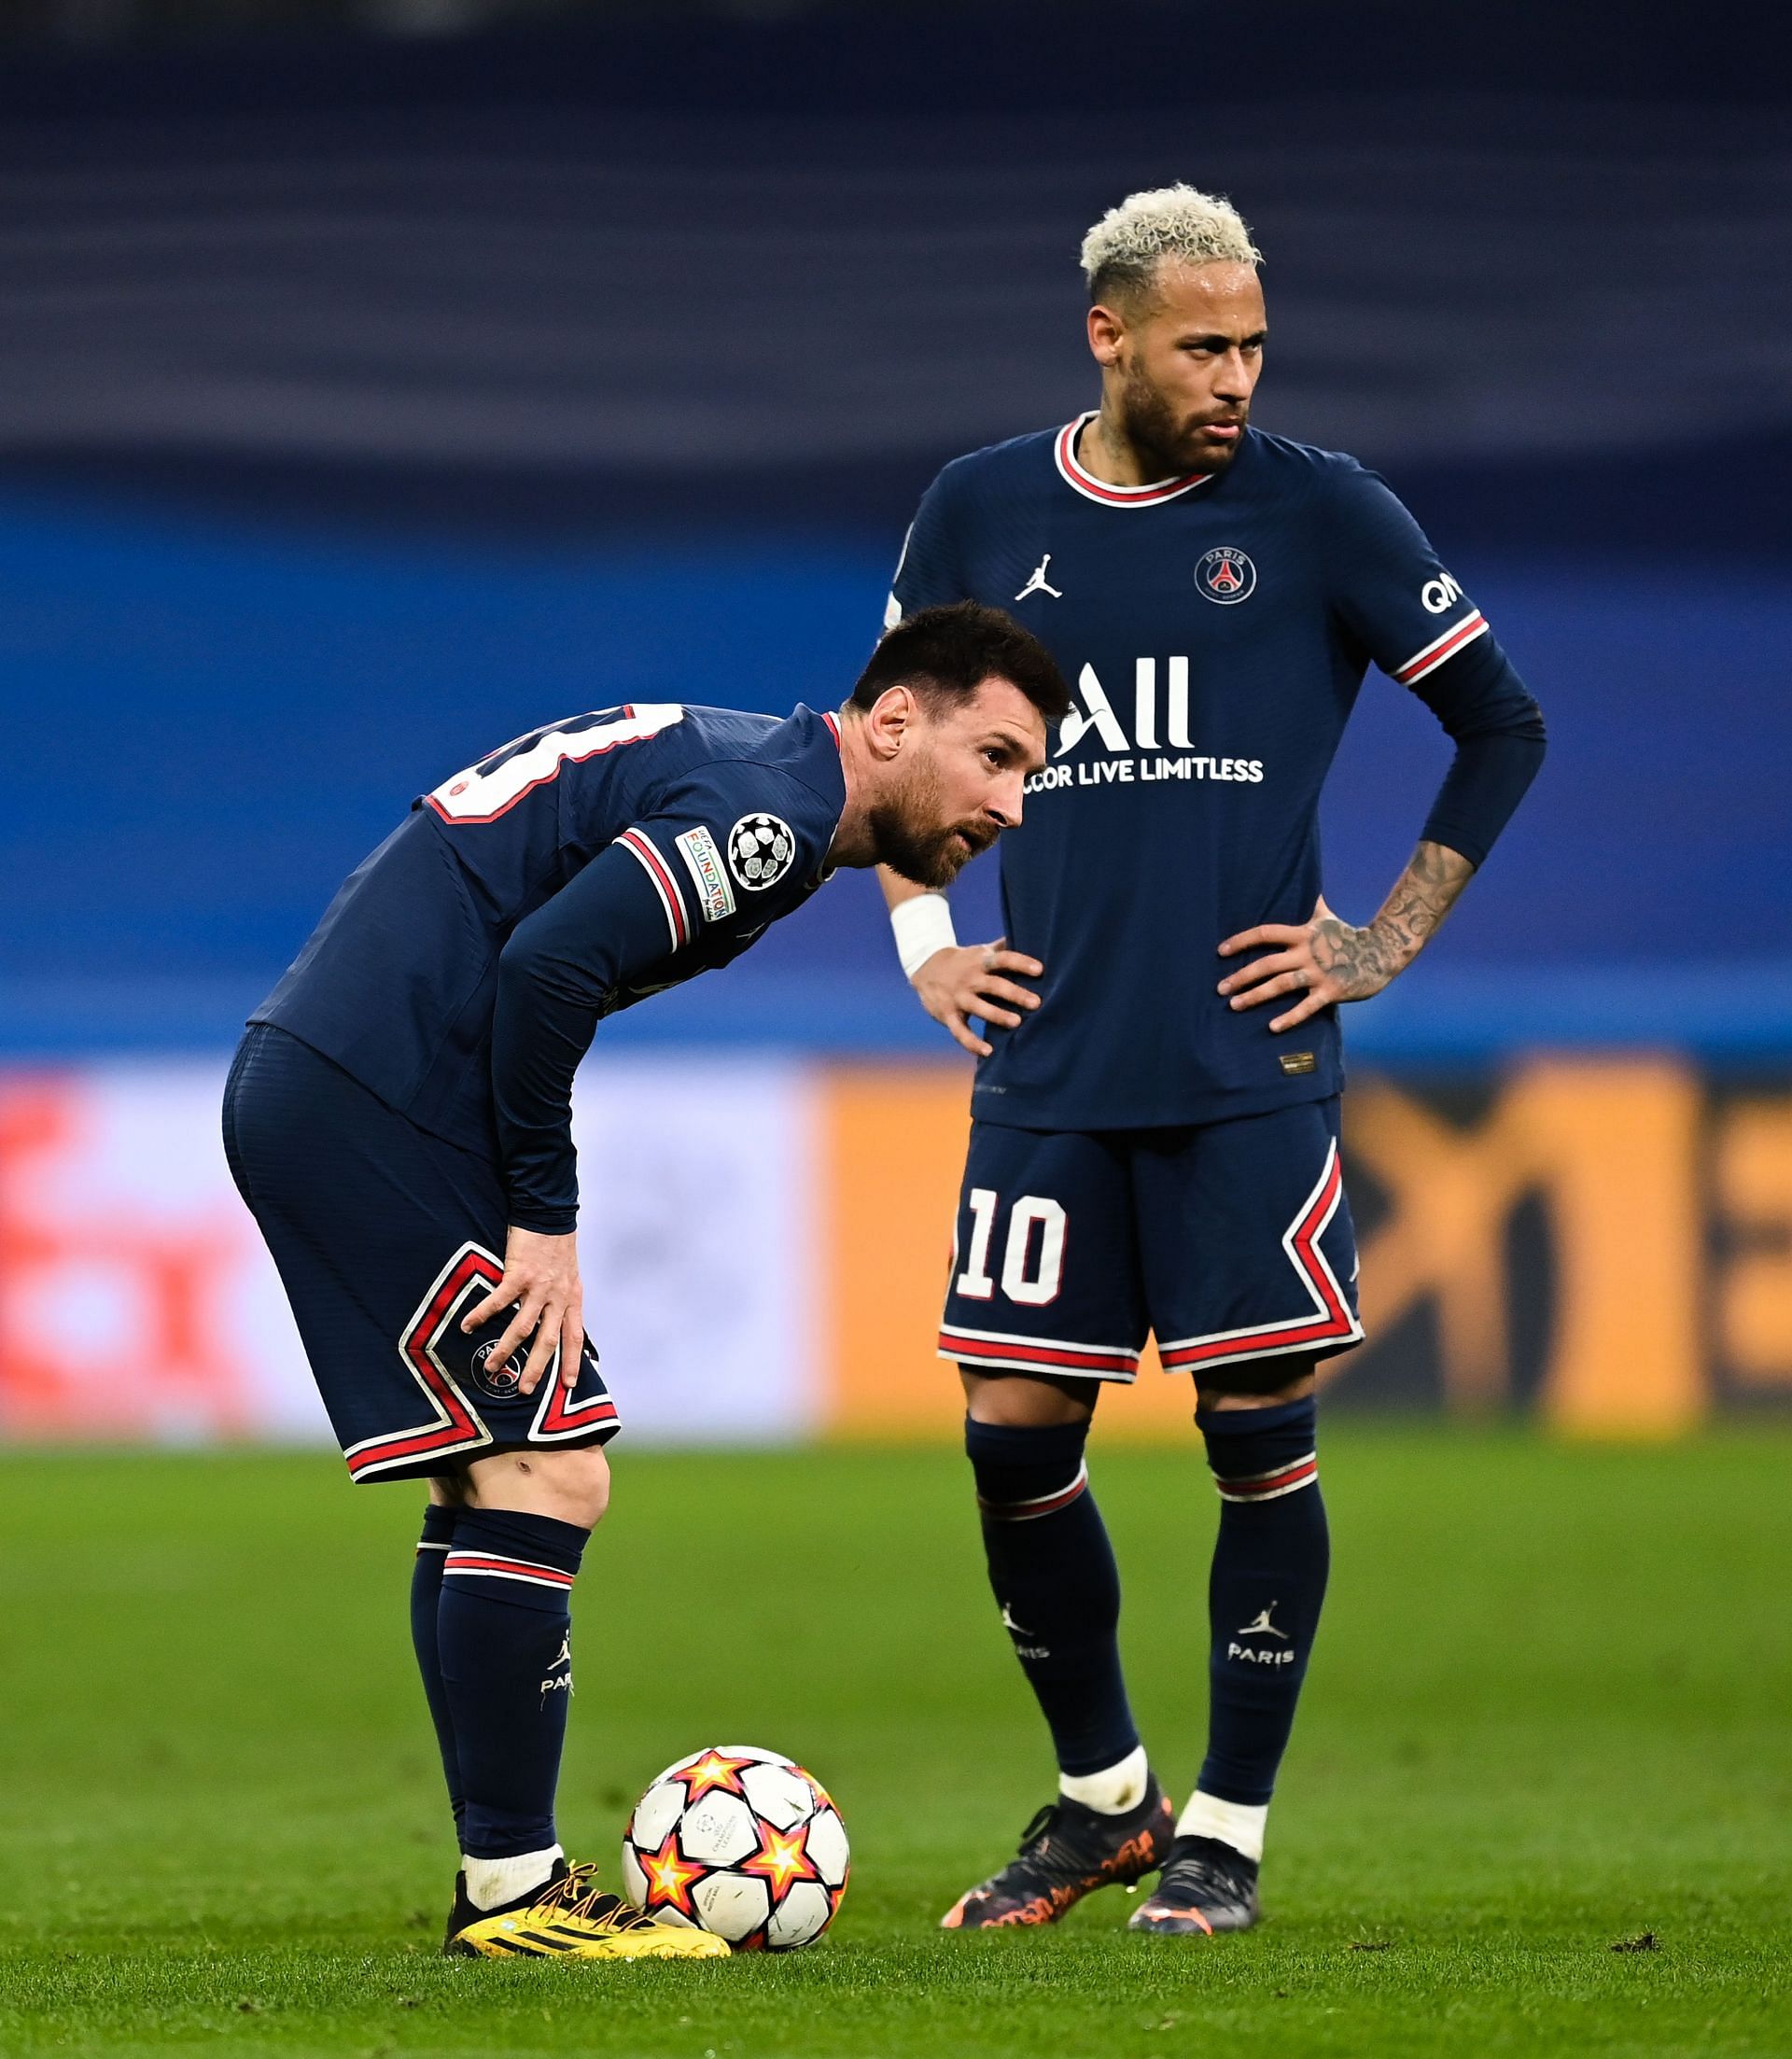 Lionel Messi (left) prepares to take a free kick while Neymar watches on.